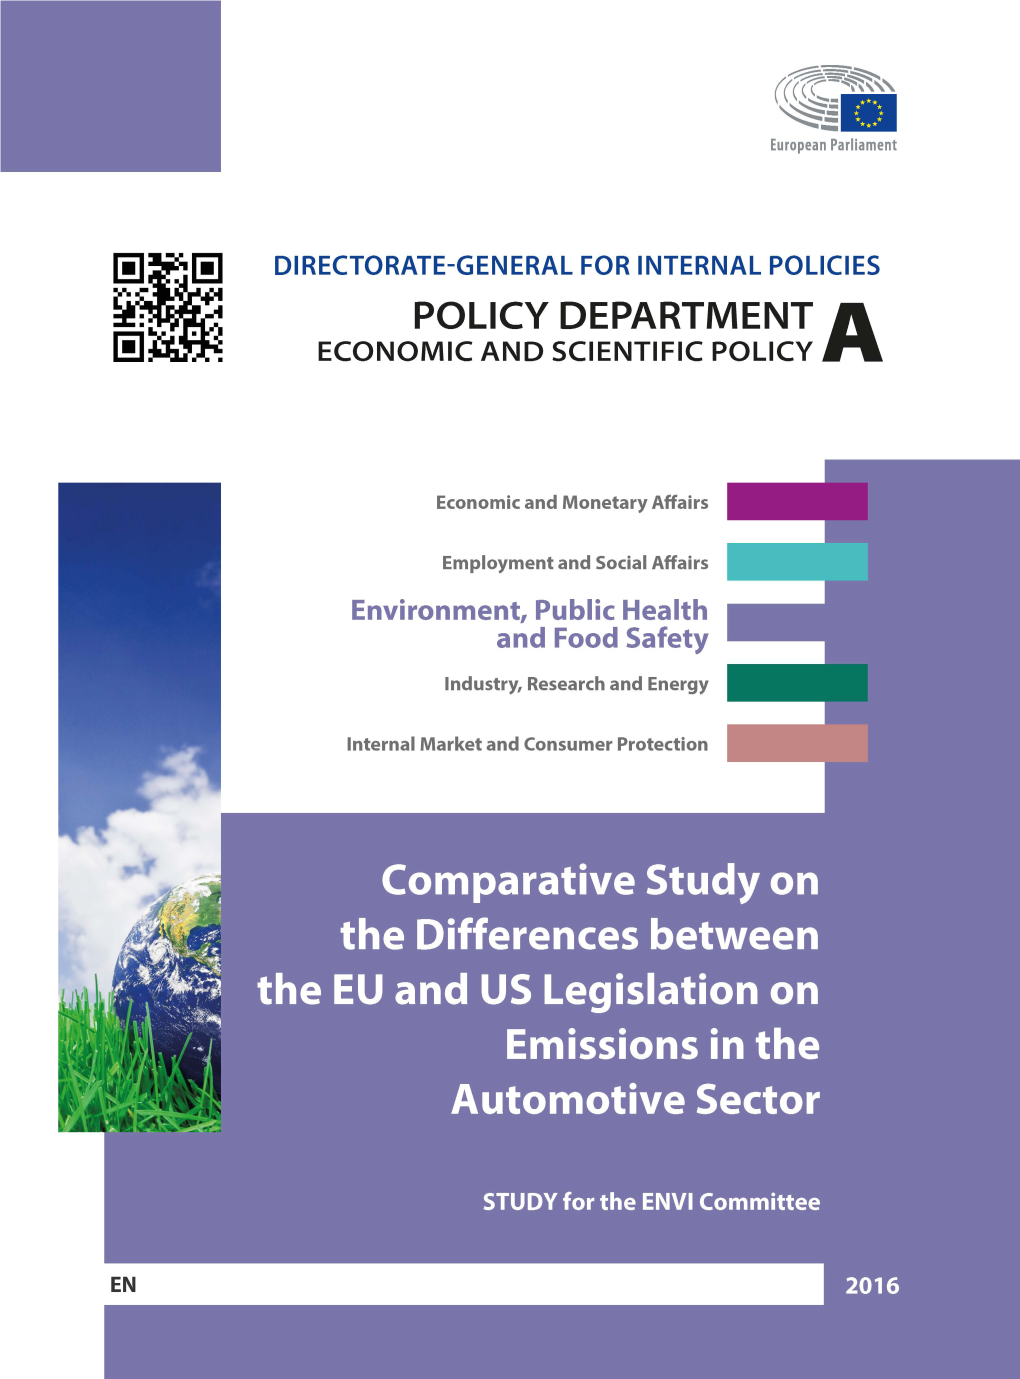 Comparative Study on the Differences Between the EU and US Legislation on Emissions in the Automotive Sector